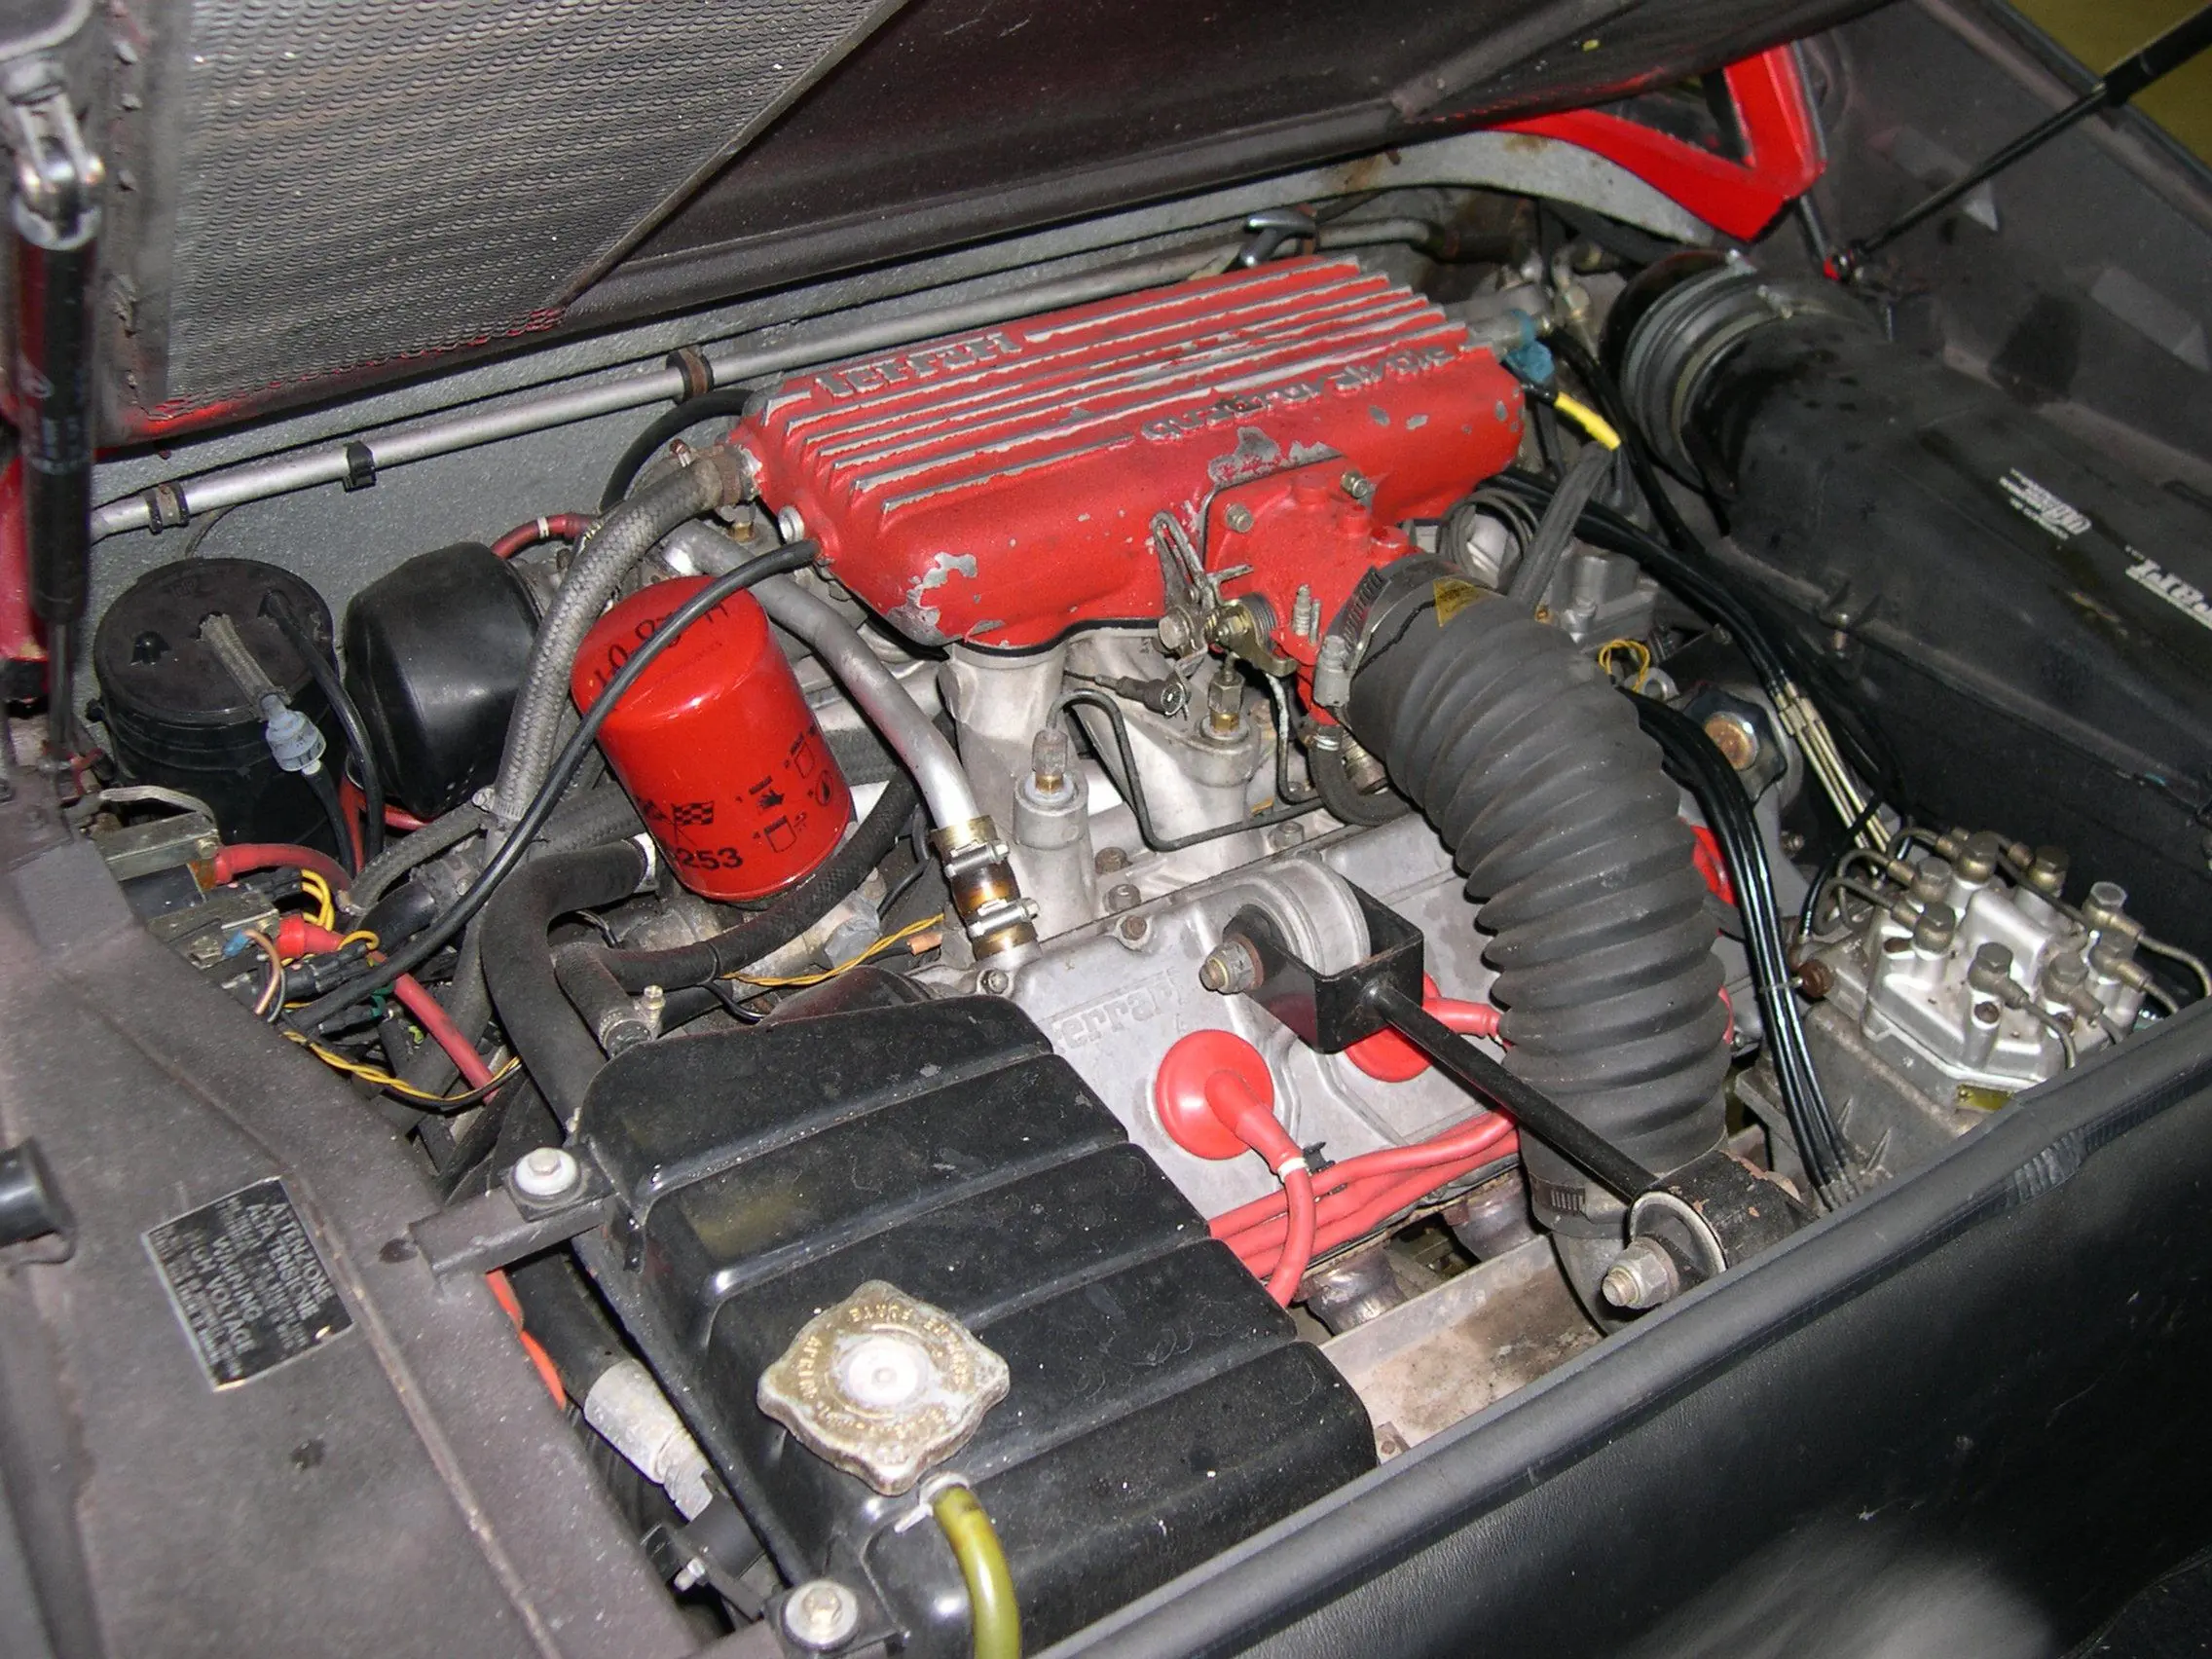 ferrari 308 gtb engine - What is the difference between Ferrari 308 GTB and GTO